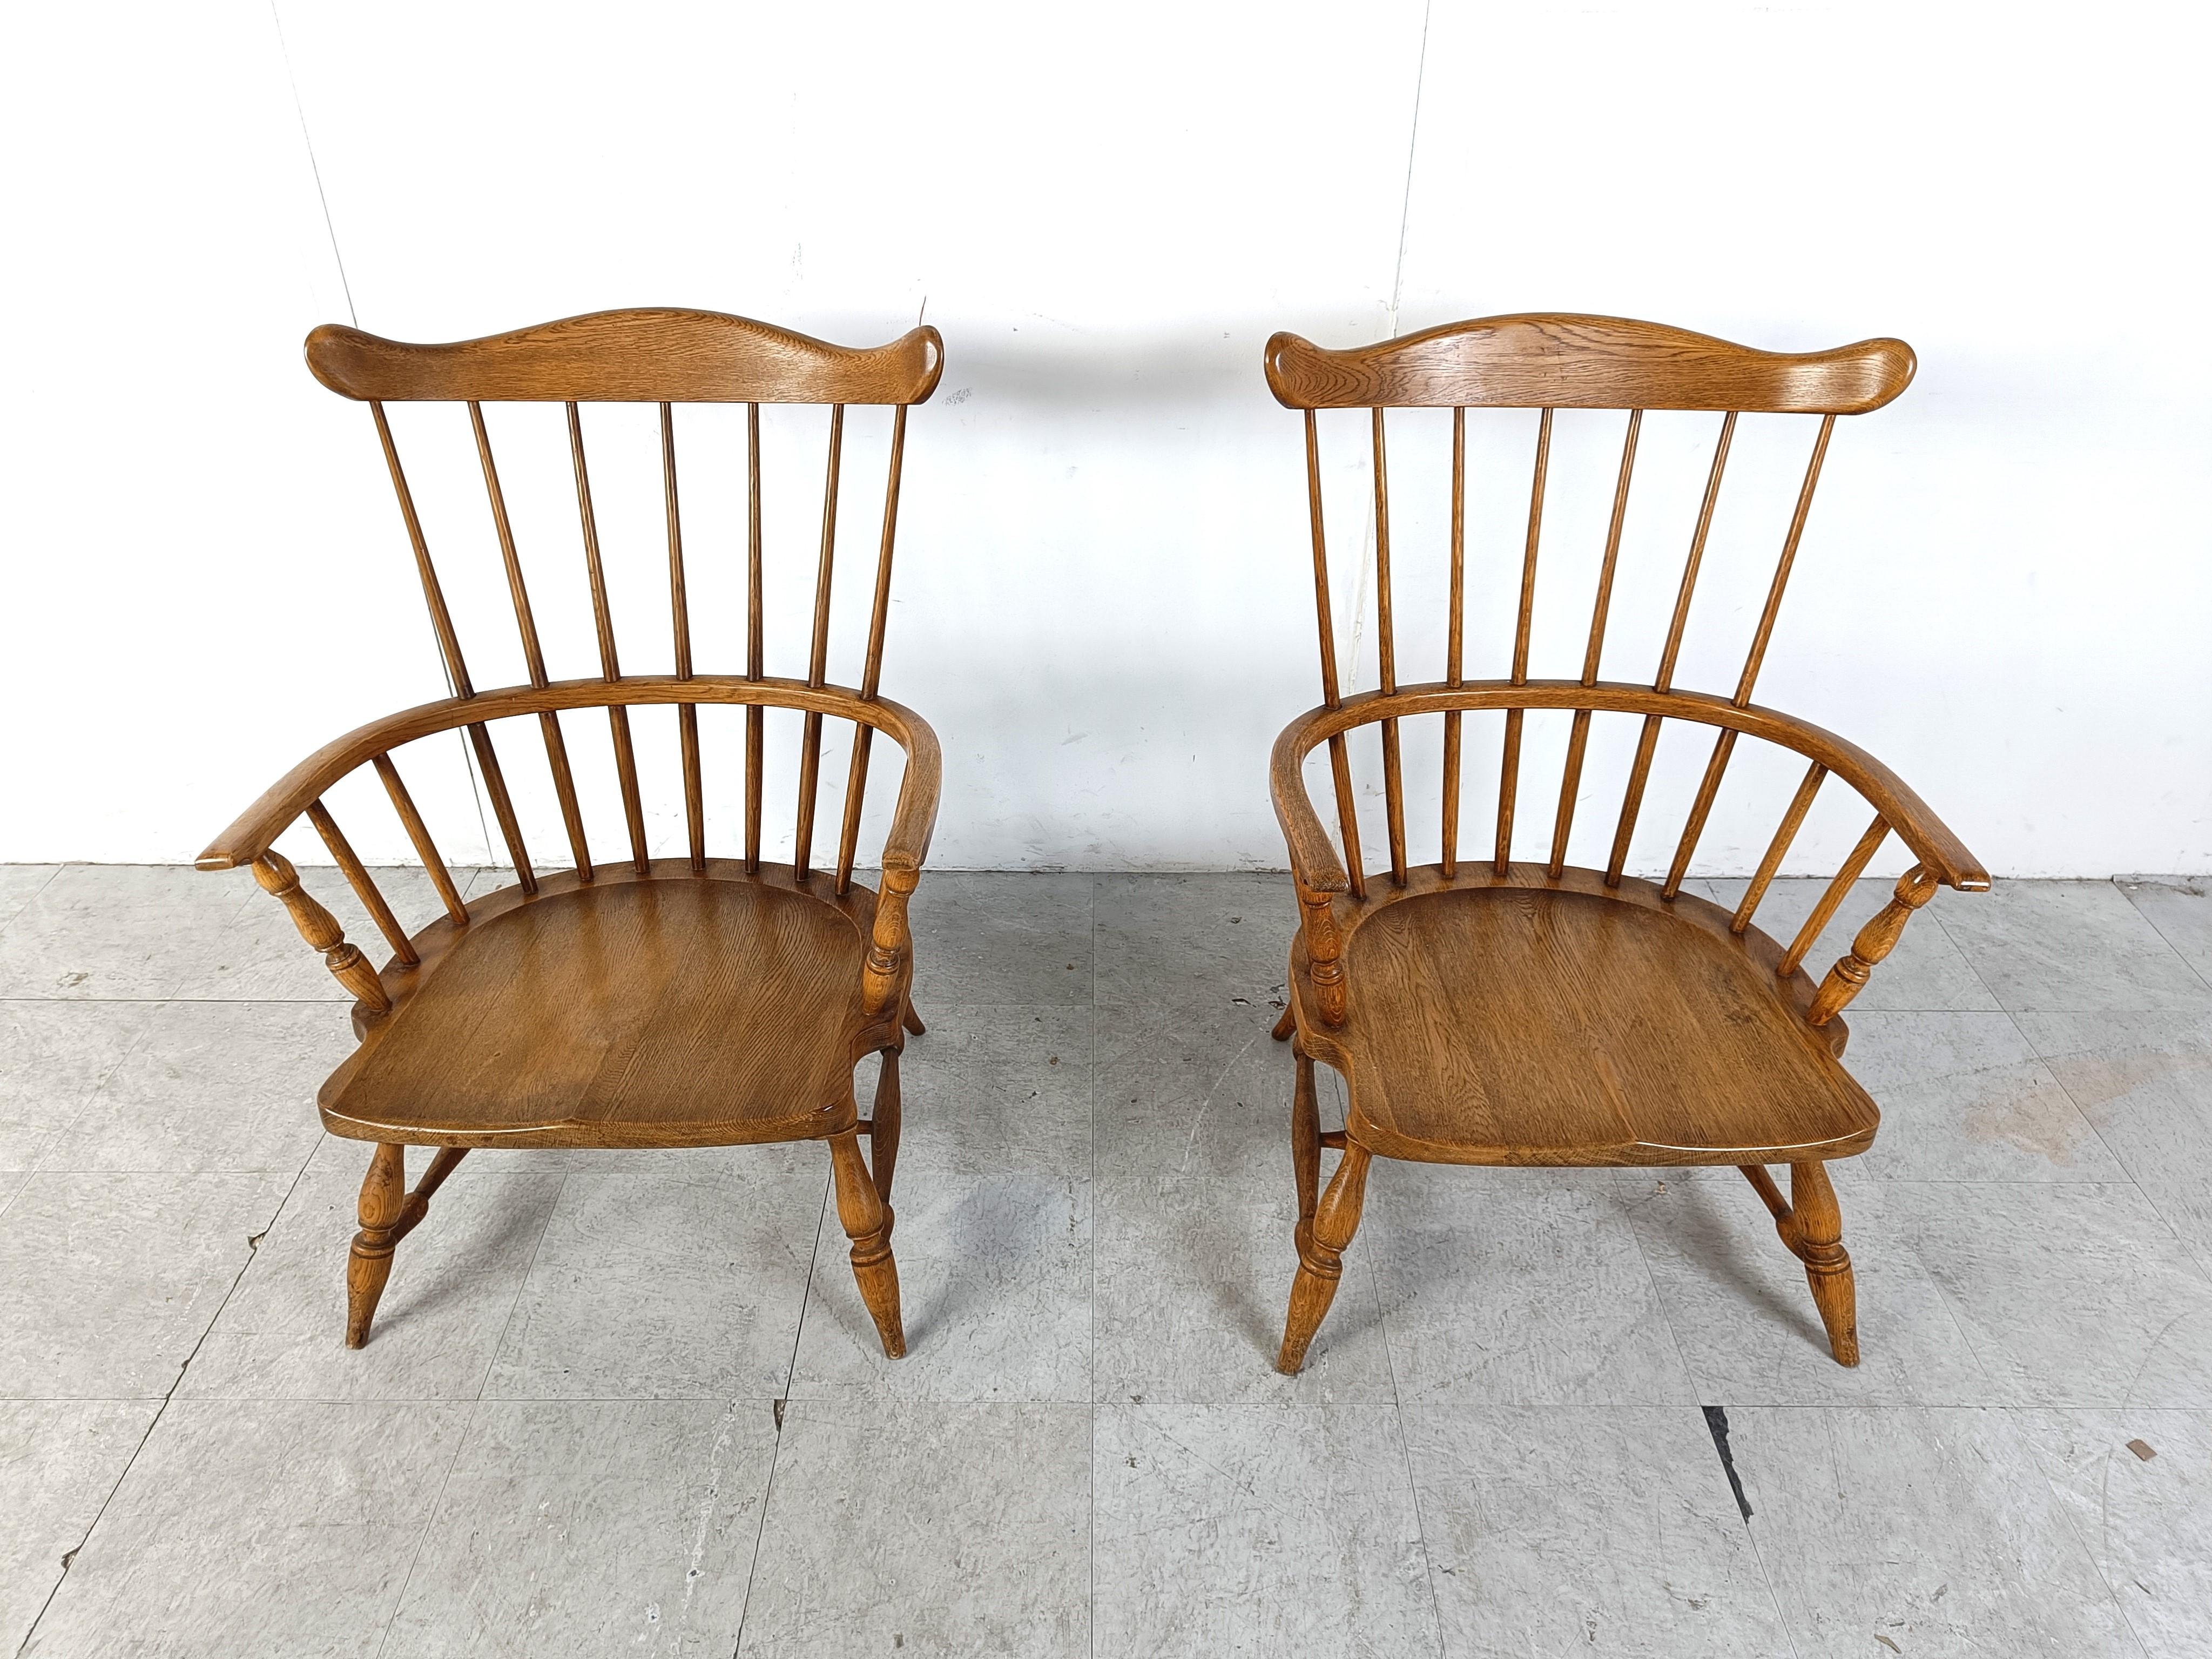 Impressive Windsor armchairs made from ash wood.

Large oversized spindle backrests which has been beautifully shaped.

Elegant pair of chairs with both a functional and decorative value.

1950s - United Kingdom

Good condition

Dimensions: 
Height: